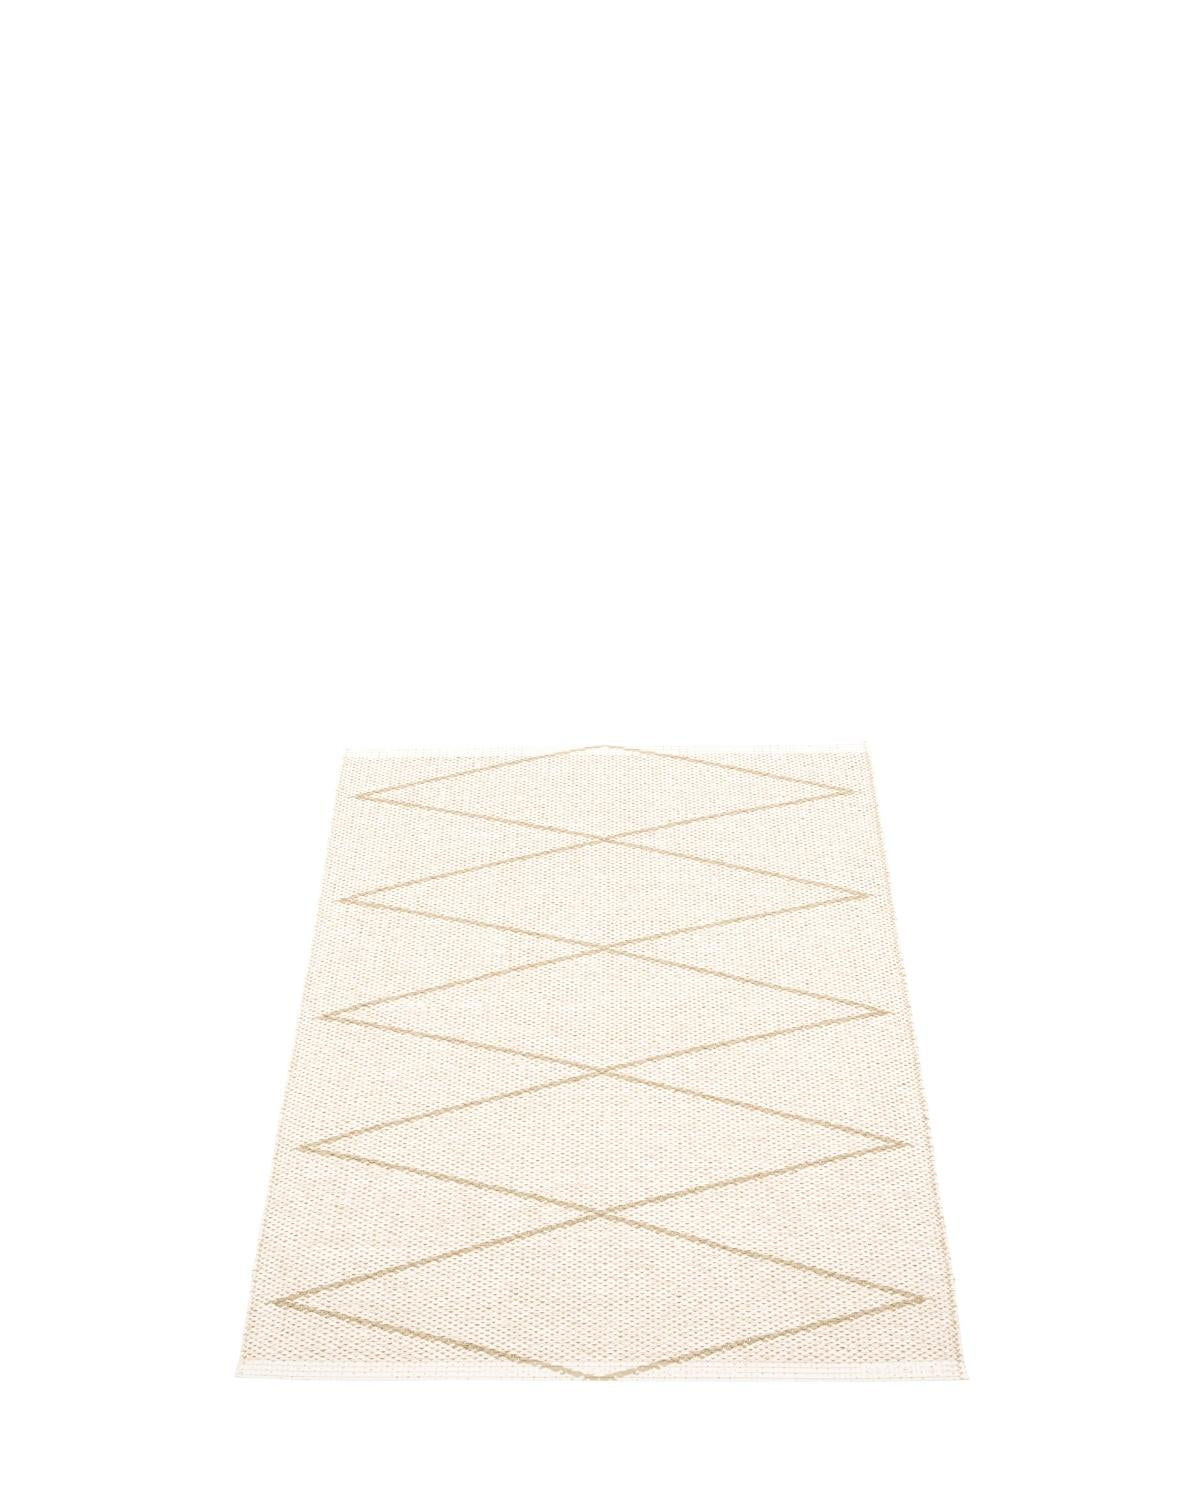 Pappelina Rug MAX Sand 2.25 x 3.25 ft  image 2